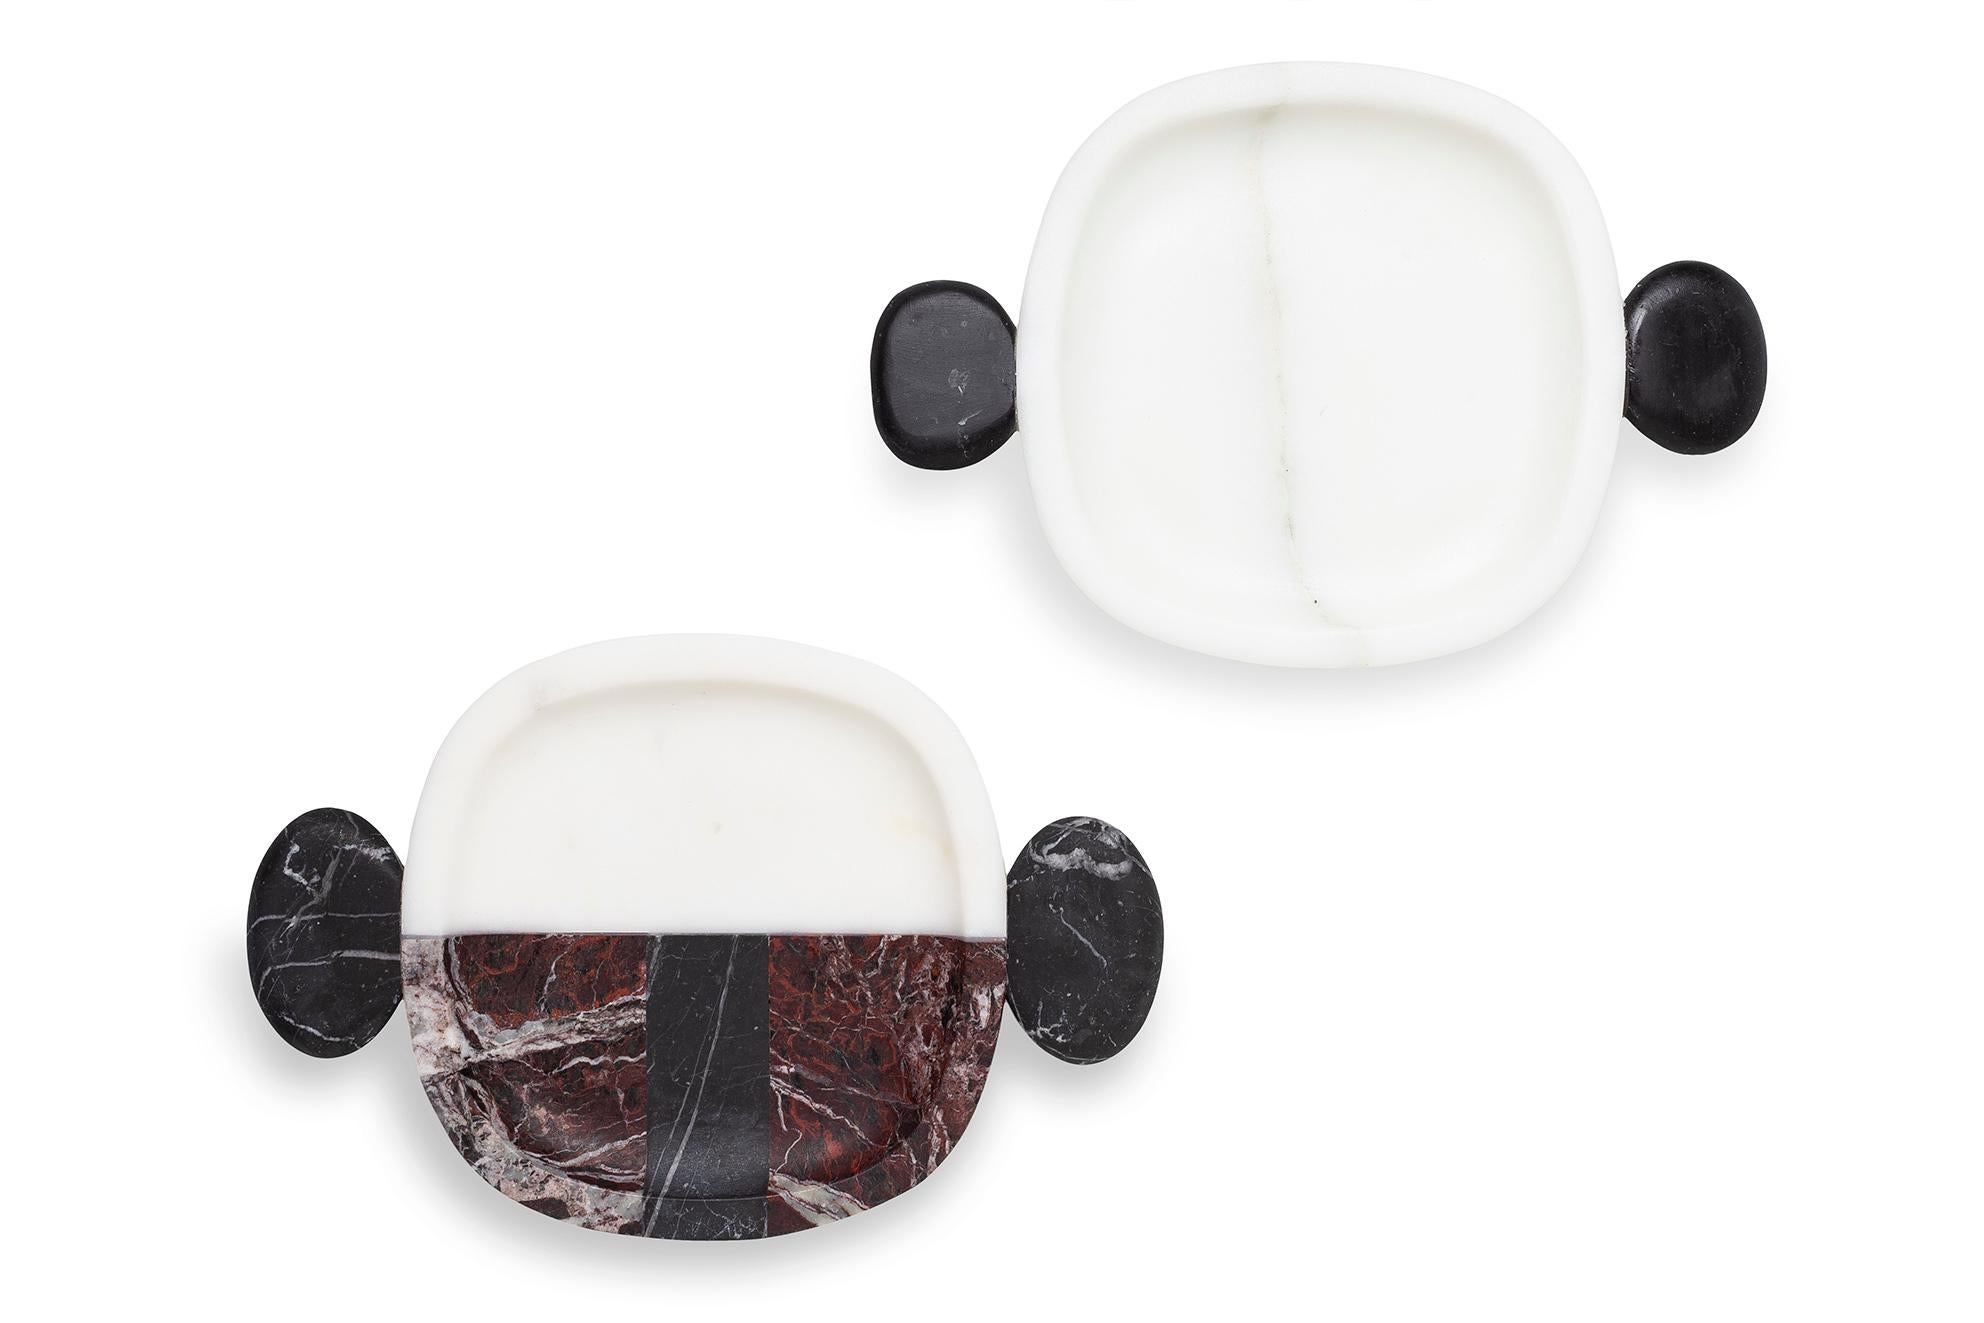 Set of 3 marble small plates and tray by Matteo Cibic
Dimensions: Plates: 22.5 x 15 x 2 cm
 Tray: 40 x 29 x 4 cm
Materials: Bianco michelangelo, nero marquinia 
 Rosso Levanto

Please note that the Cibic pieces with “ears” or tray handles are